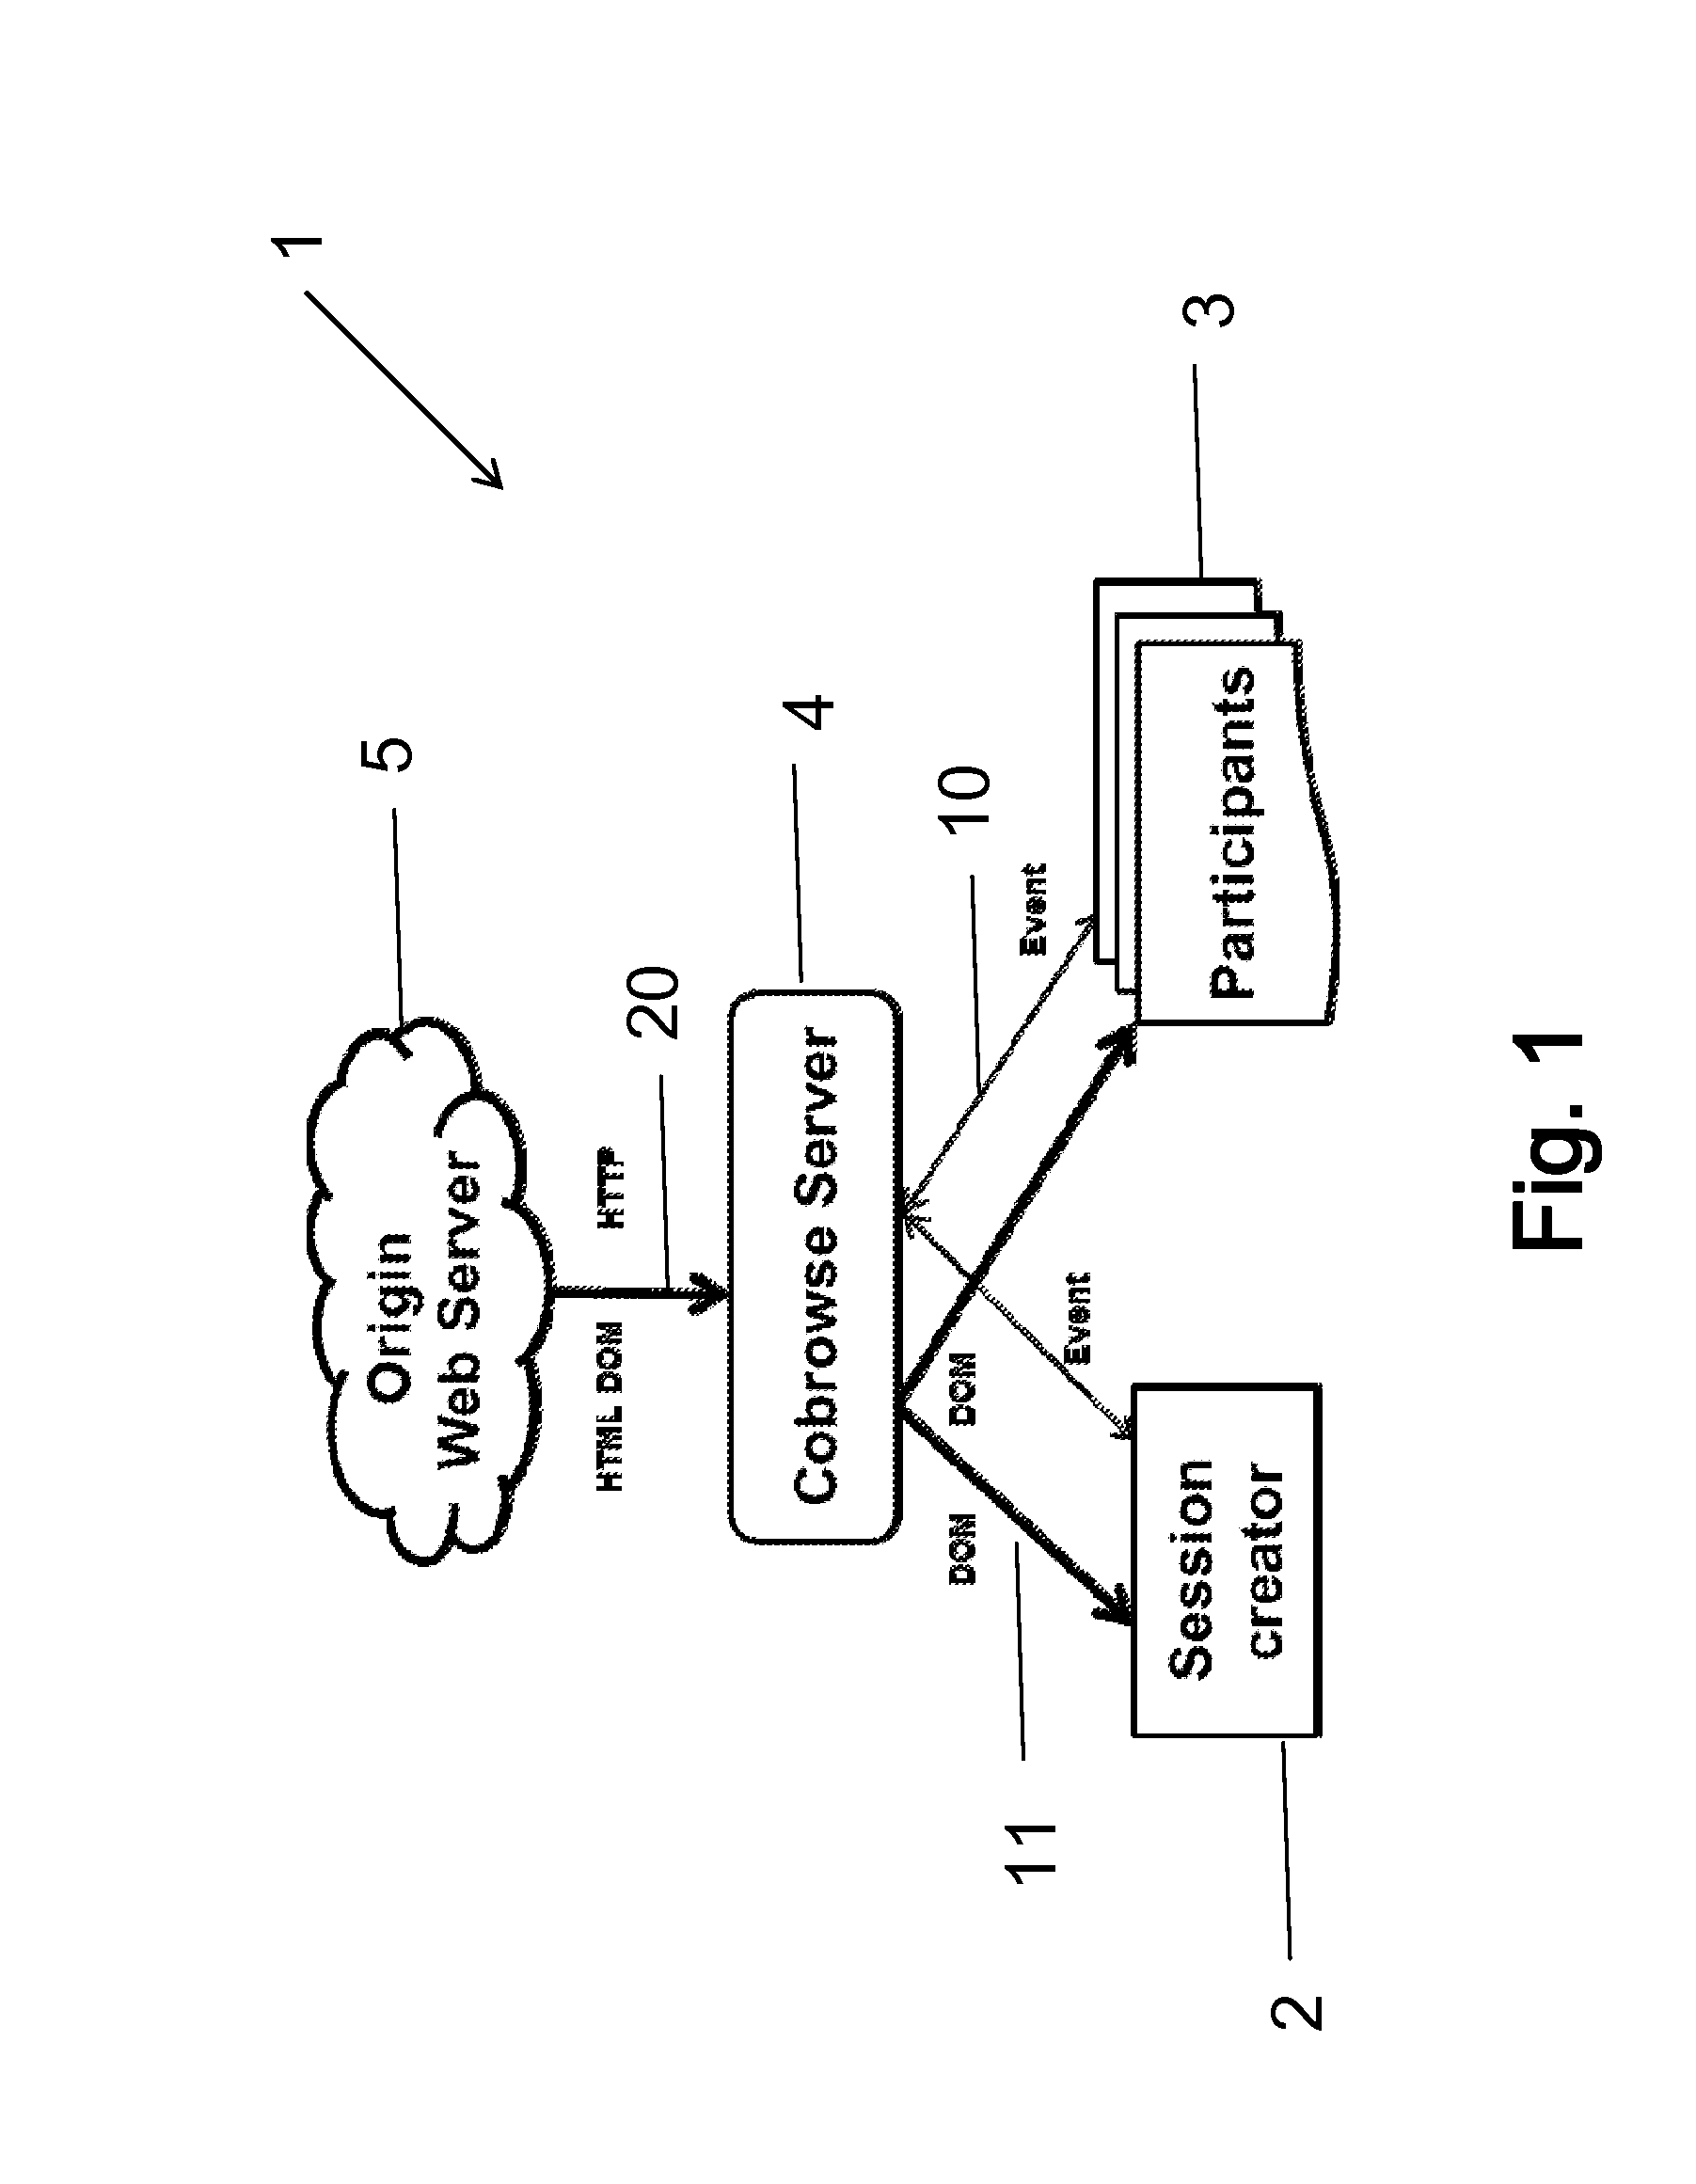 Method and system for providing a multiuser web session